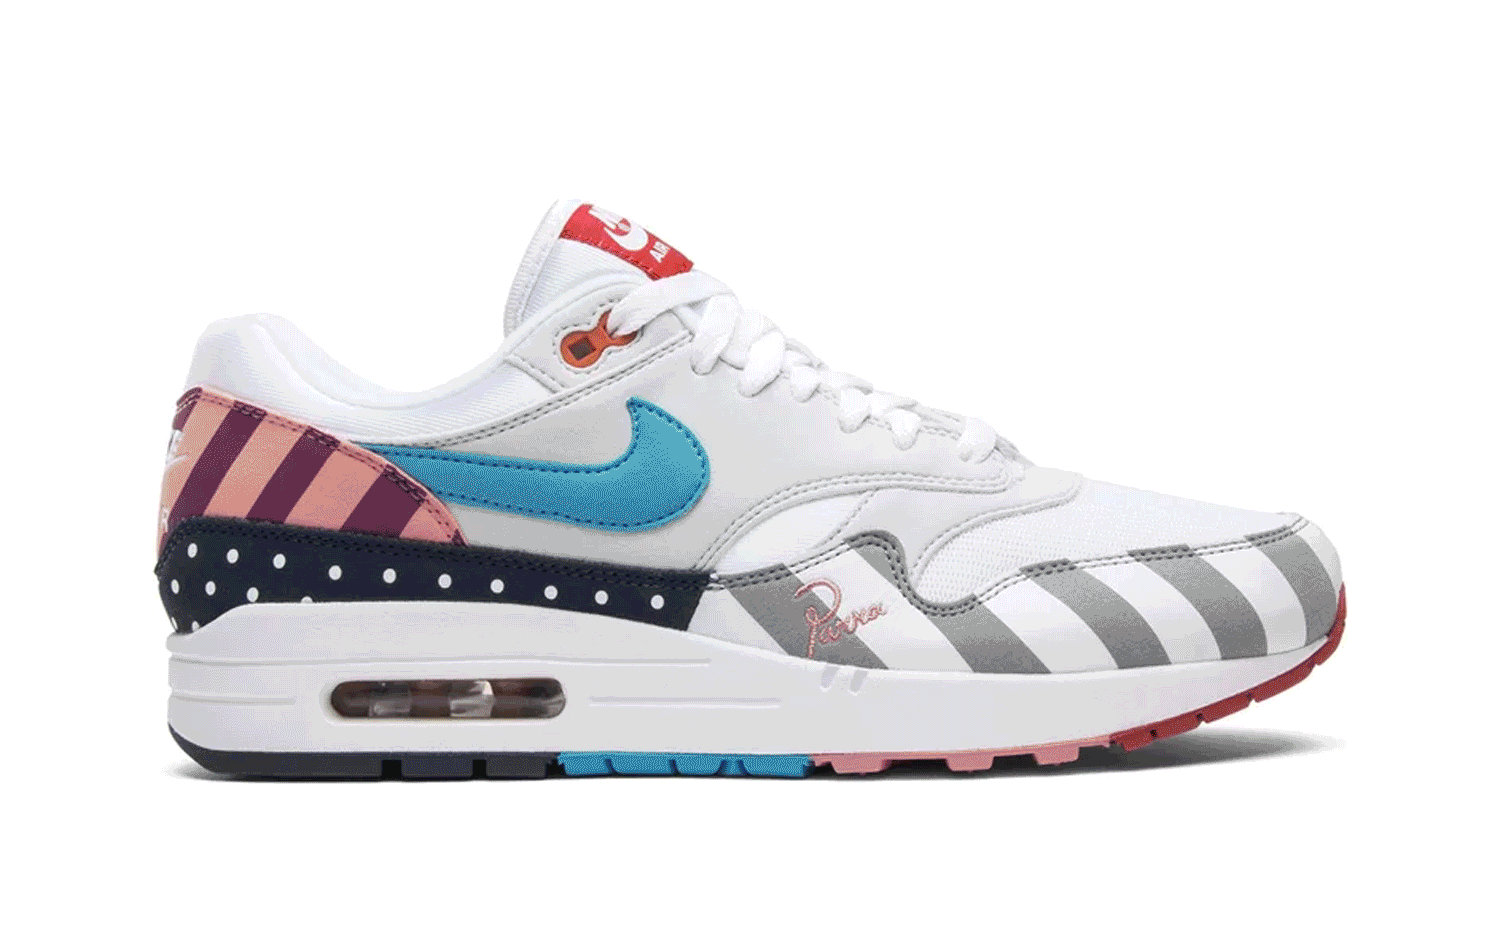 Win the Voyage Air Max Releases of the Decade with Whatnot